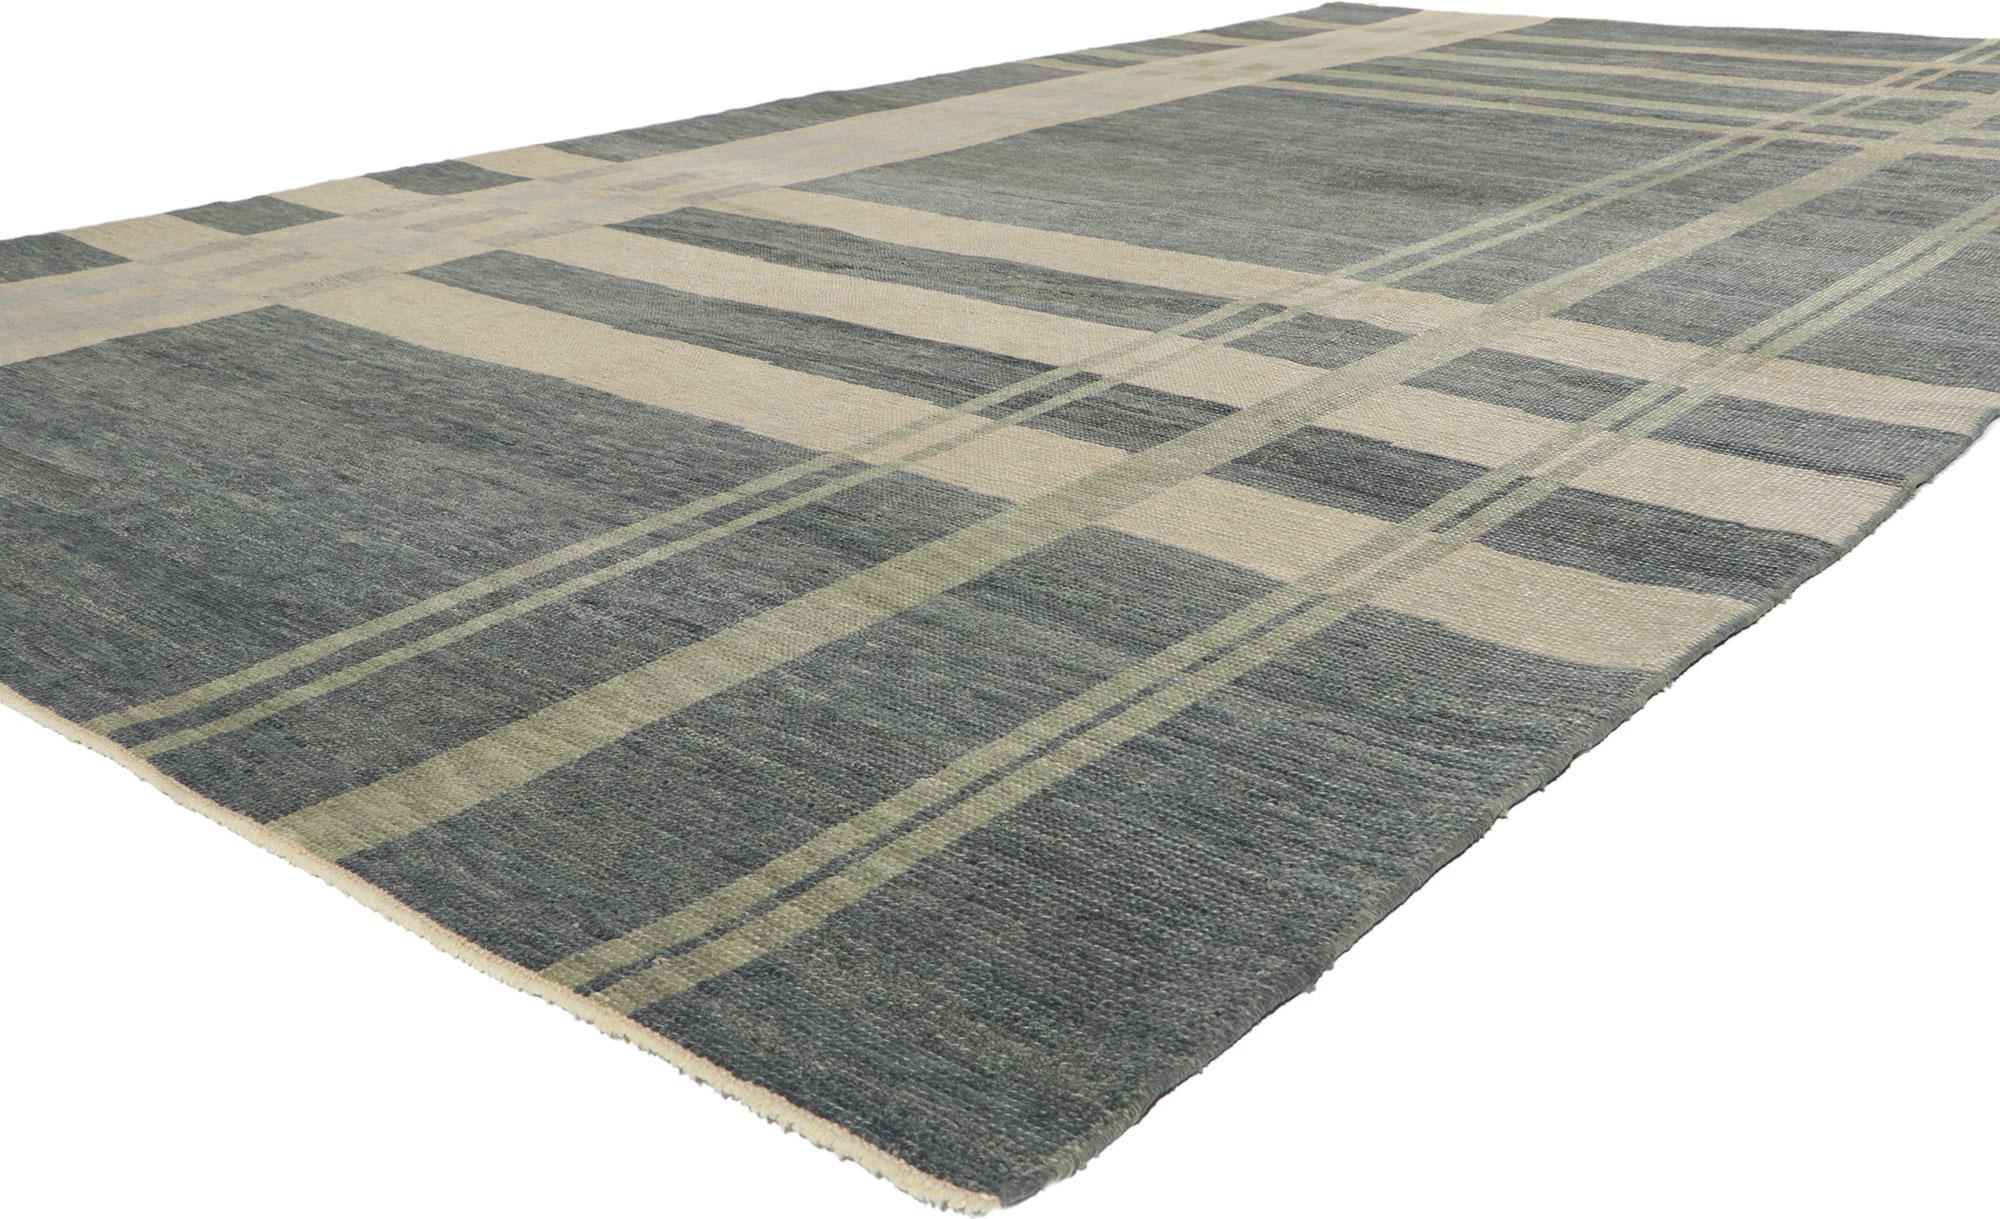 53804 New Modern Plaid Tartan Rug with Ivy League Style, 08'01 x 14'10. Displaying a charming masculine appeal and the embodiment of ivy league style, this hand knotted wool contemporary plaid tartan rug is a captivating vision of woven beauty with